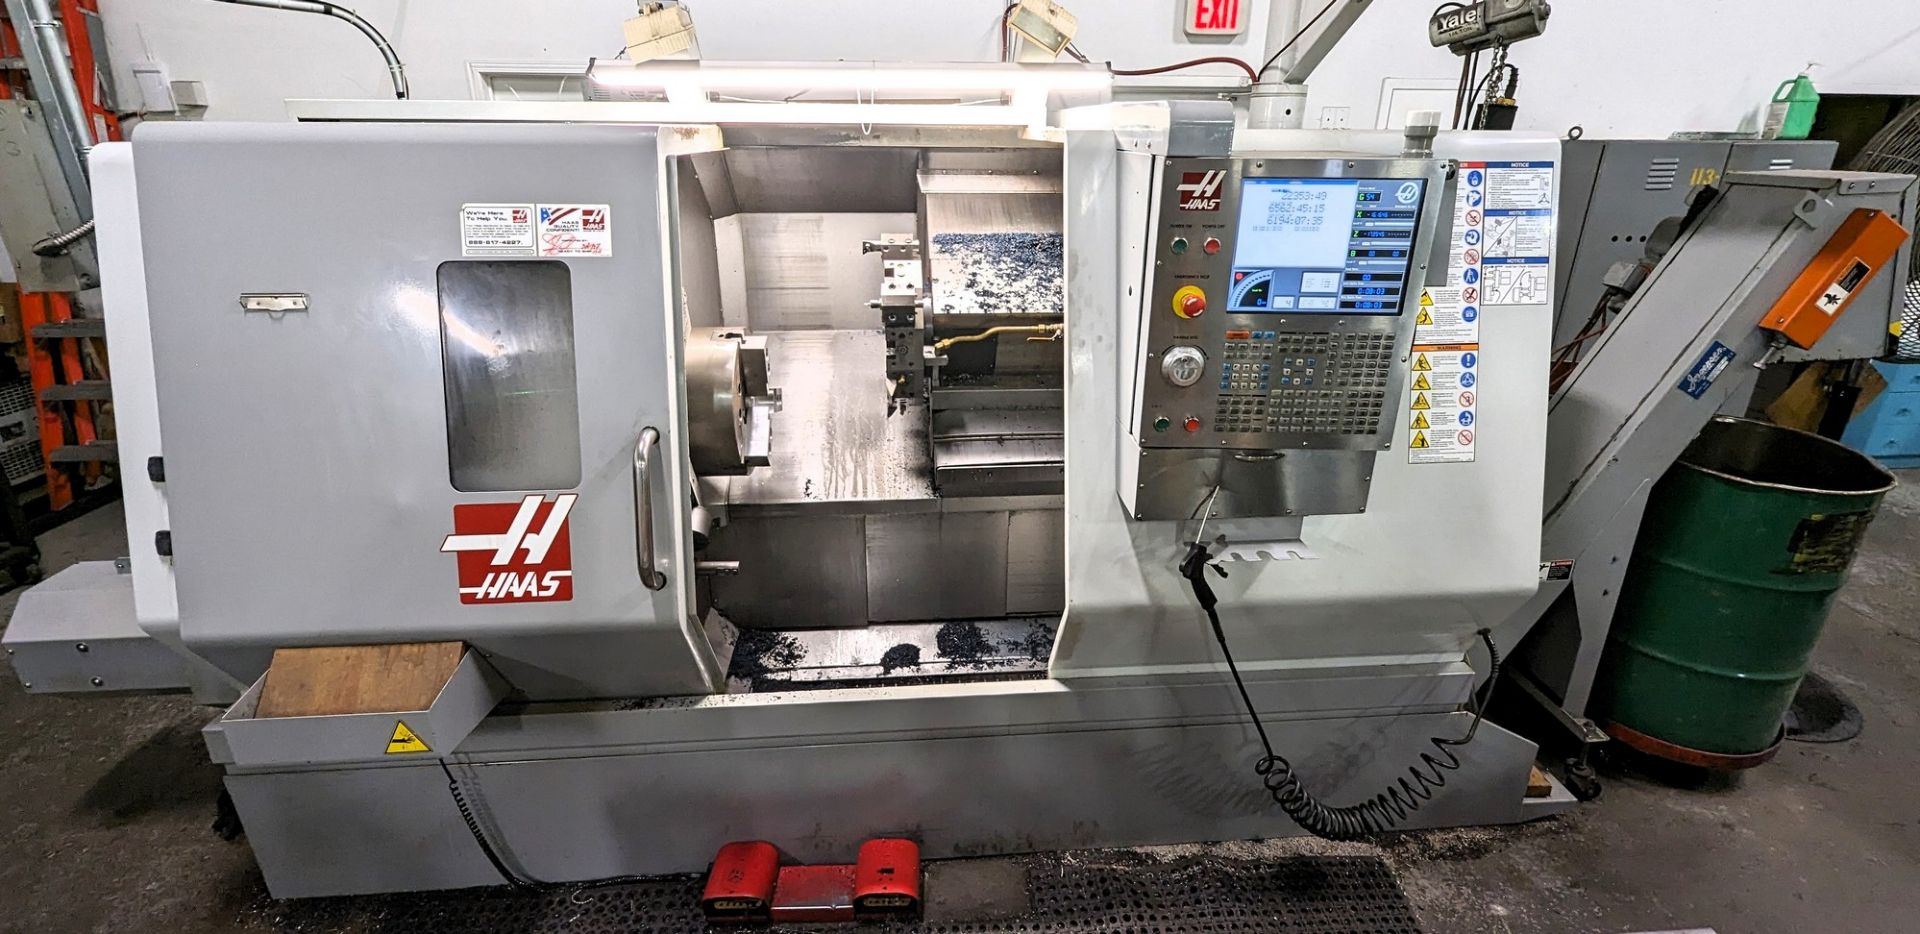 2008 HAAS SL-30TB CNC TURNING CENTER, CNC CONTROL, 15” CHUCK, BIG BORE, TAILSTOCK, TOOL SETTER, CHIP - Image 2 of 14